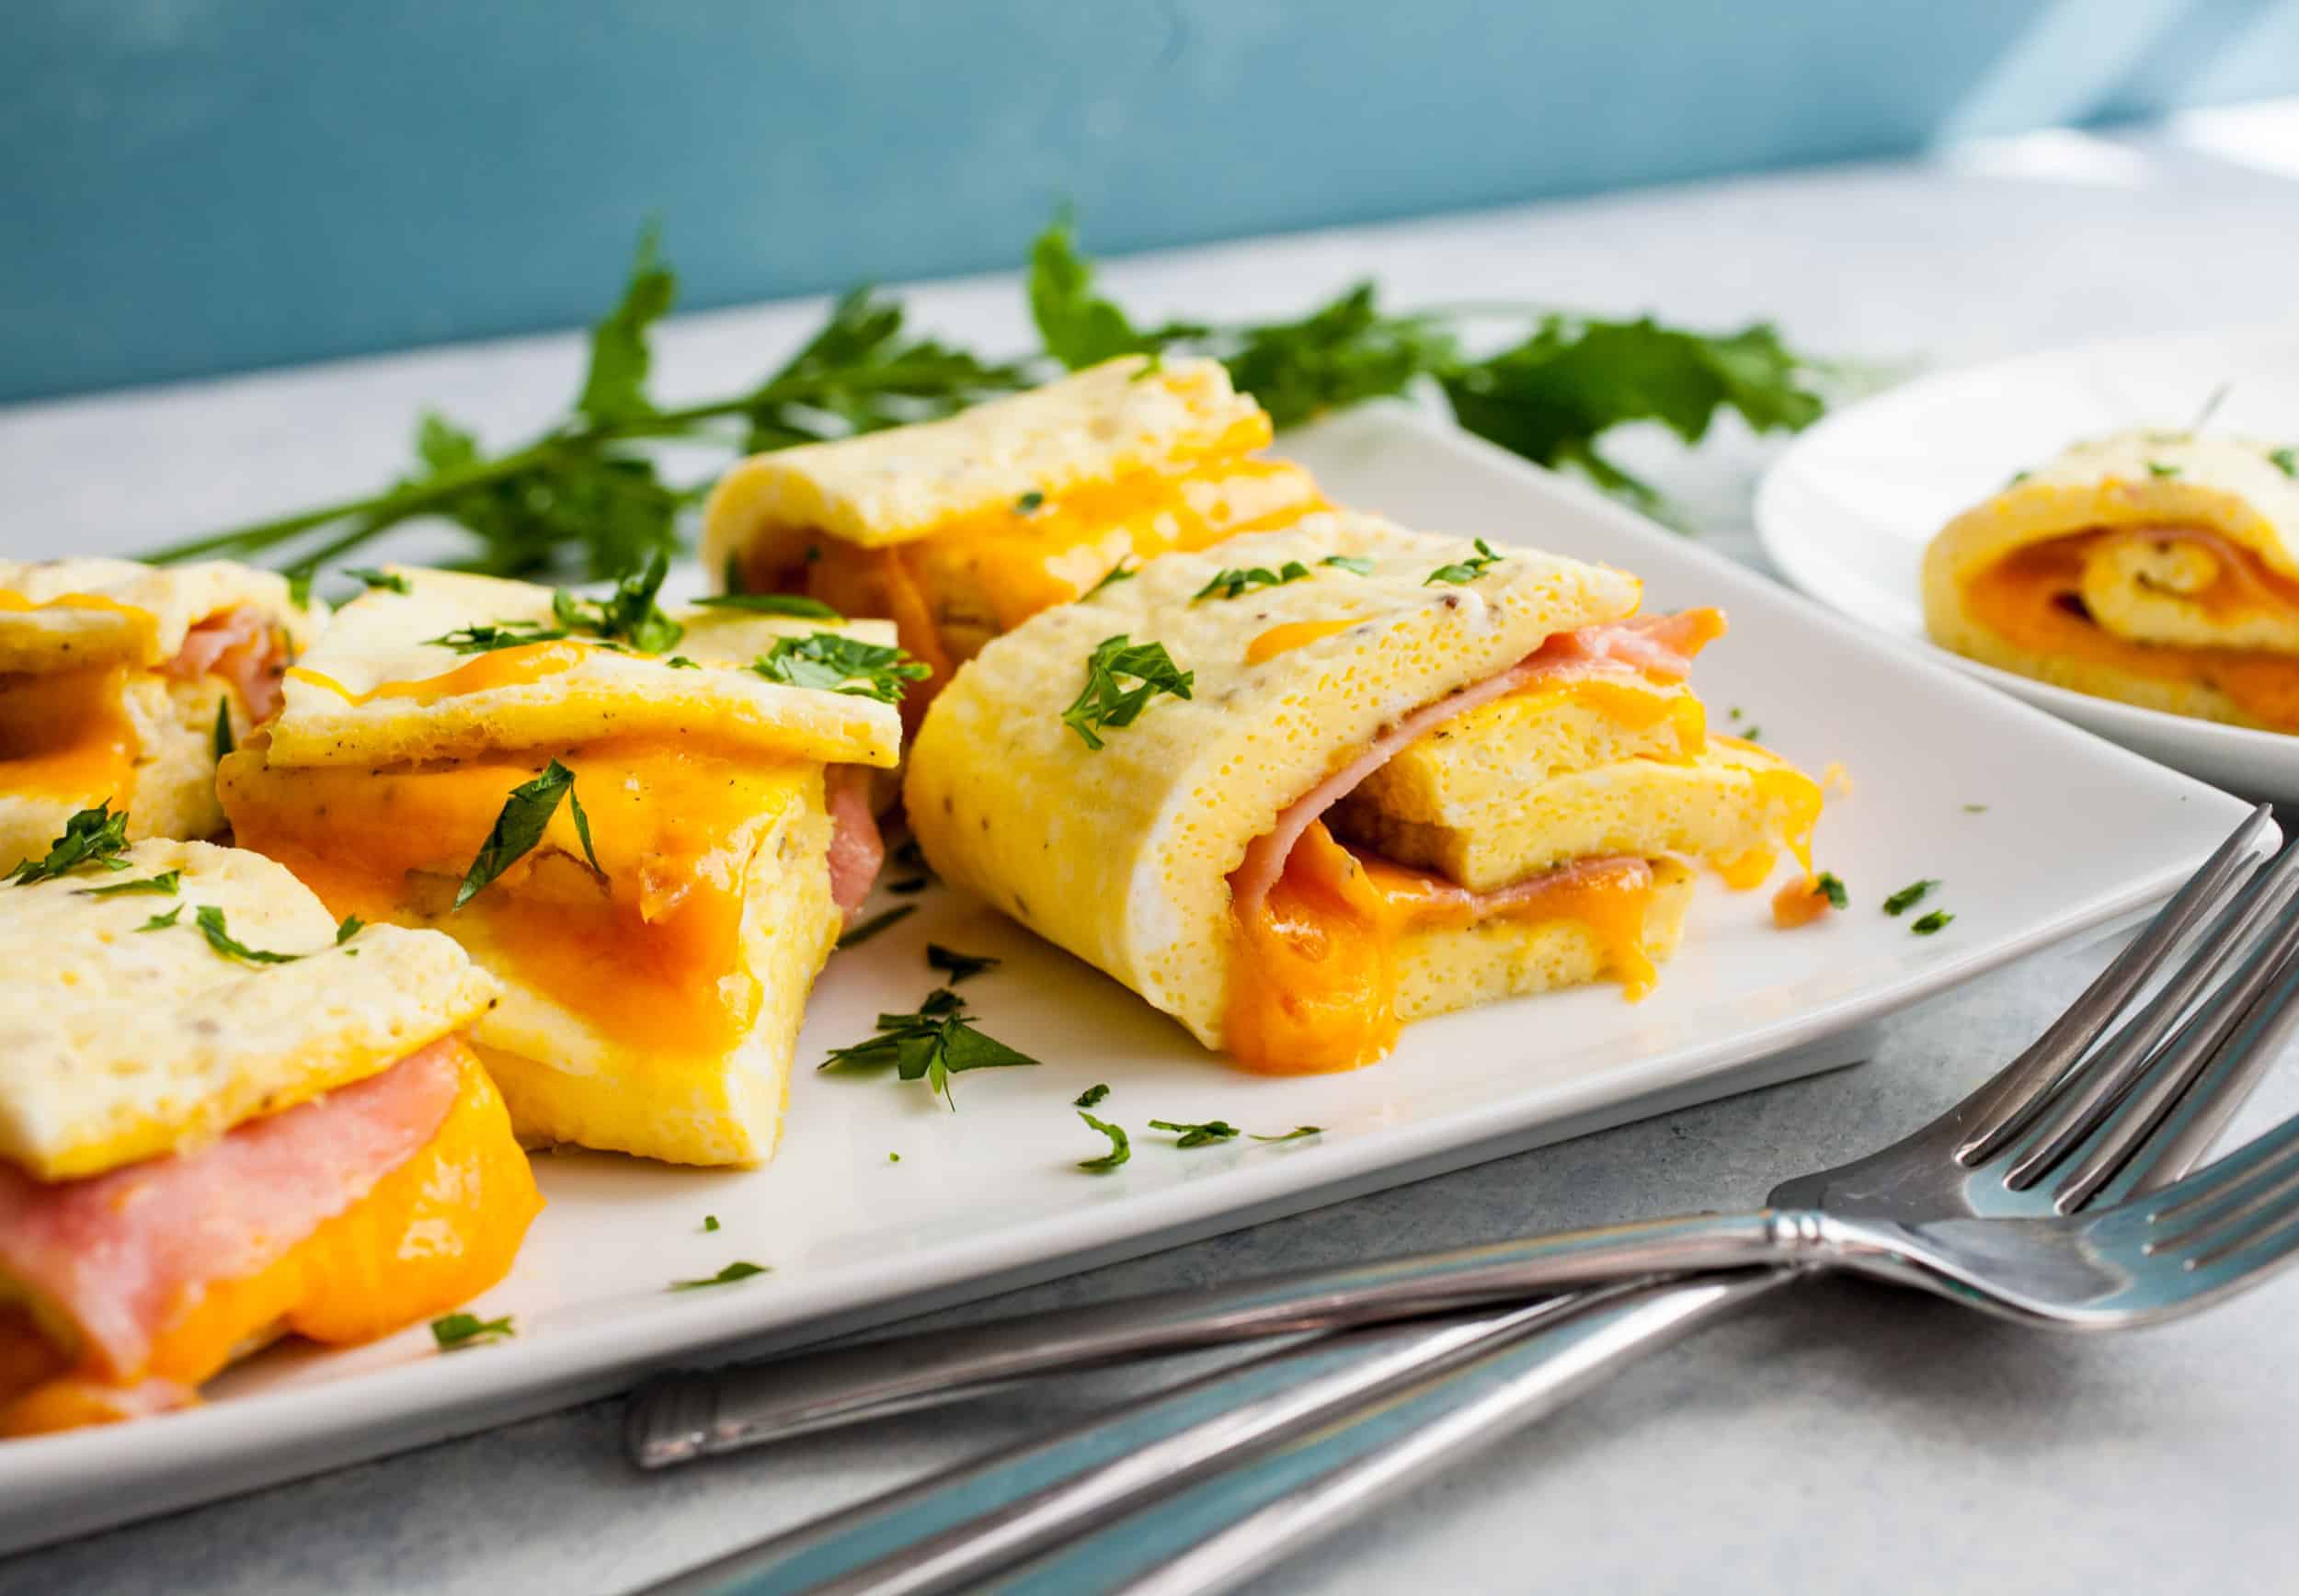 12 Egg Omelette For A Party Ham And Cheese Macheesmo,Easy Meatball Recipe In Oven